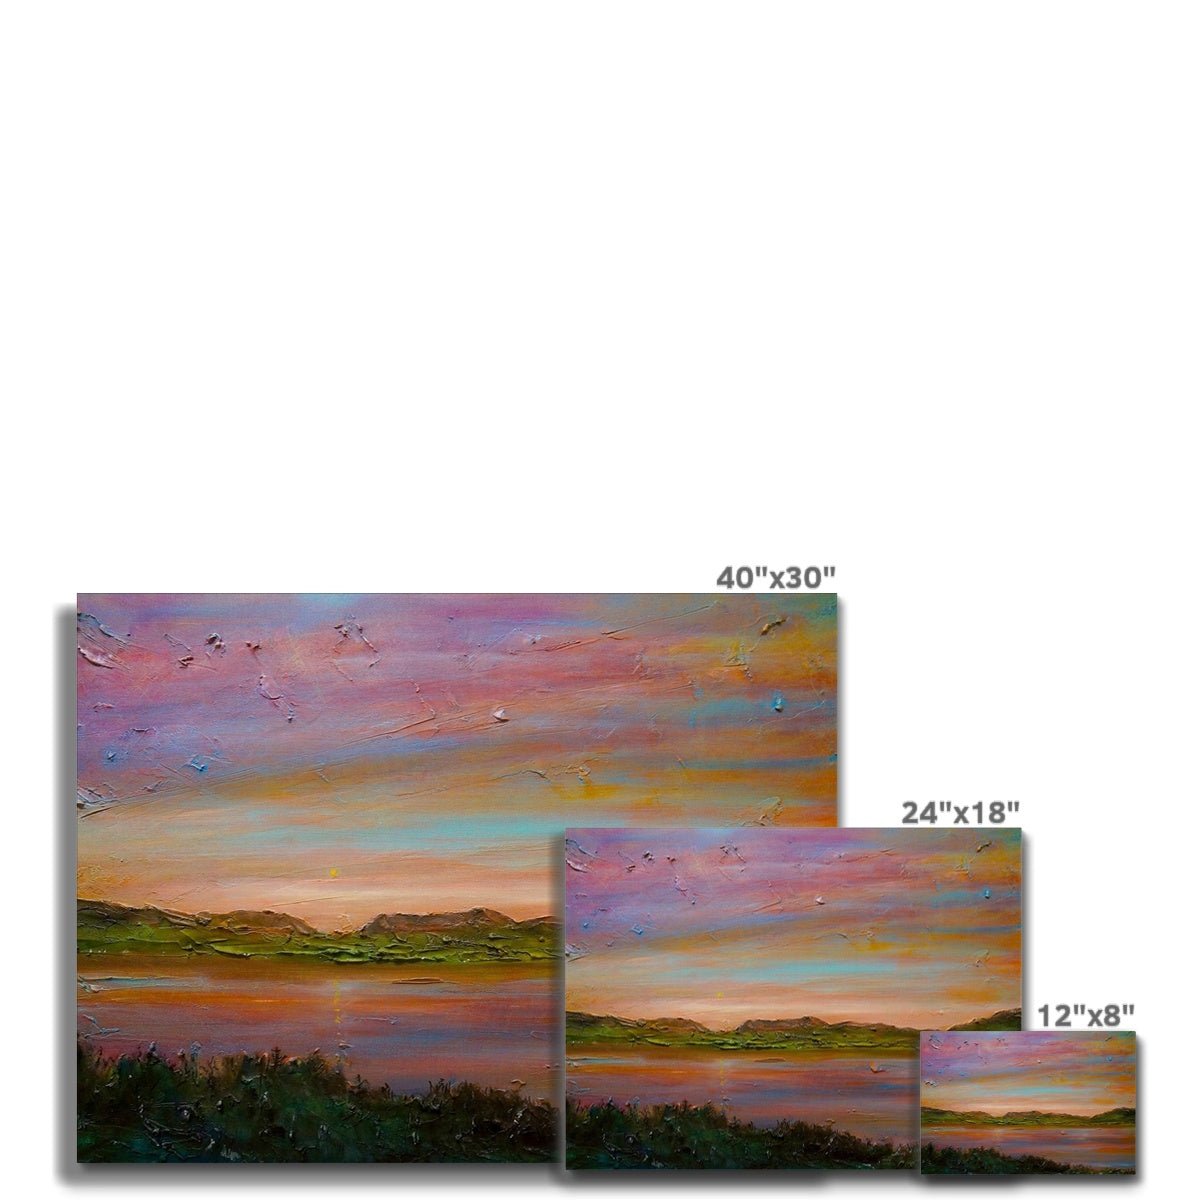 Gourock Golf Club Sunset Painting | Canvas From Scotland-Contemporary Stretched Canvas Prints-River Clyde Art Gallery-Paintings, Prints, Homeware, Art Gifts From Scotland By Scottish Artist Kevin Hunter